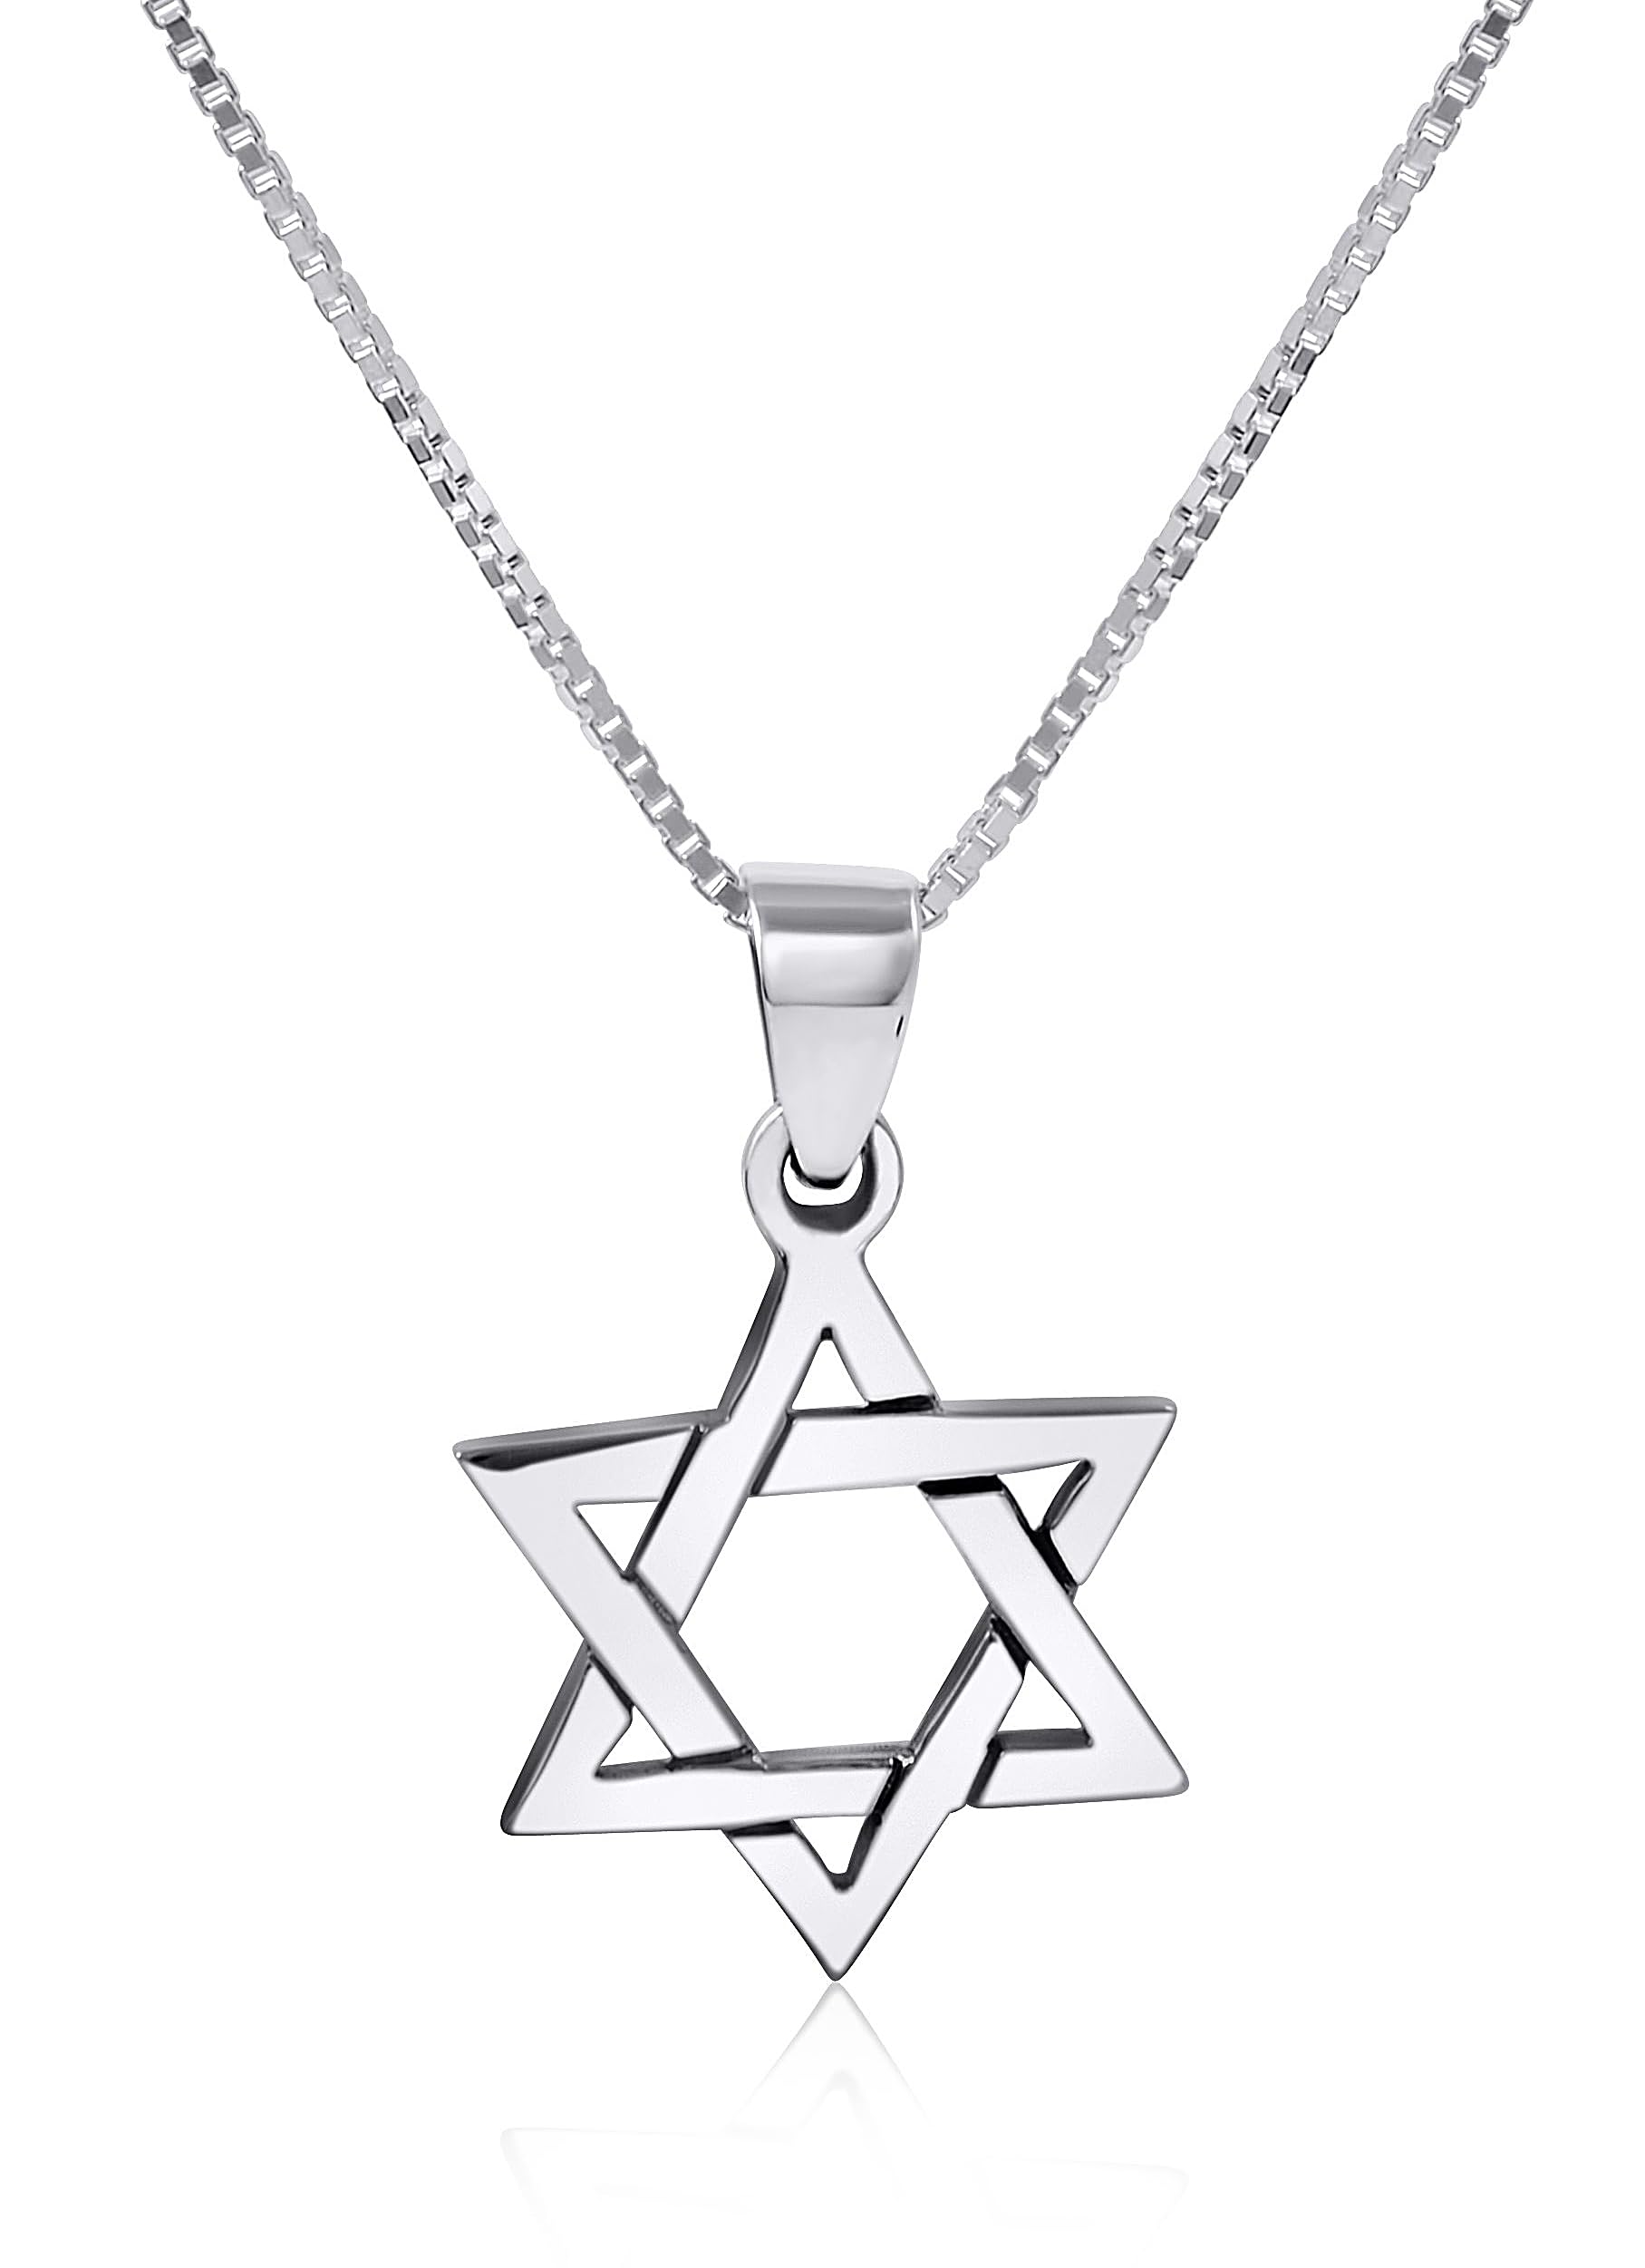 AJDesign Star of David Necklace Pendant 925 Sterling Silver Jewish Jewelry for Men Women Religious